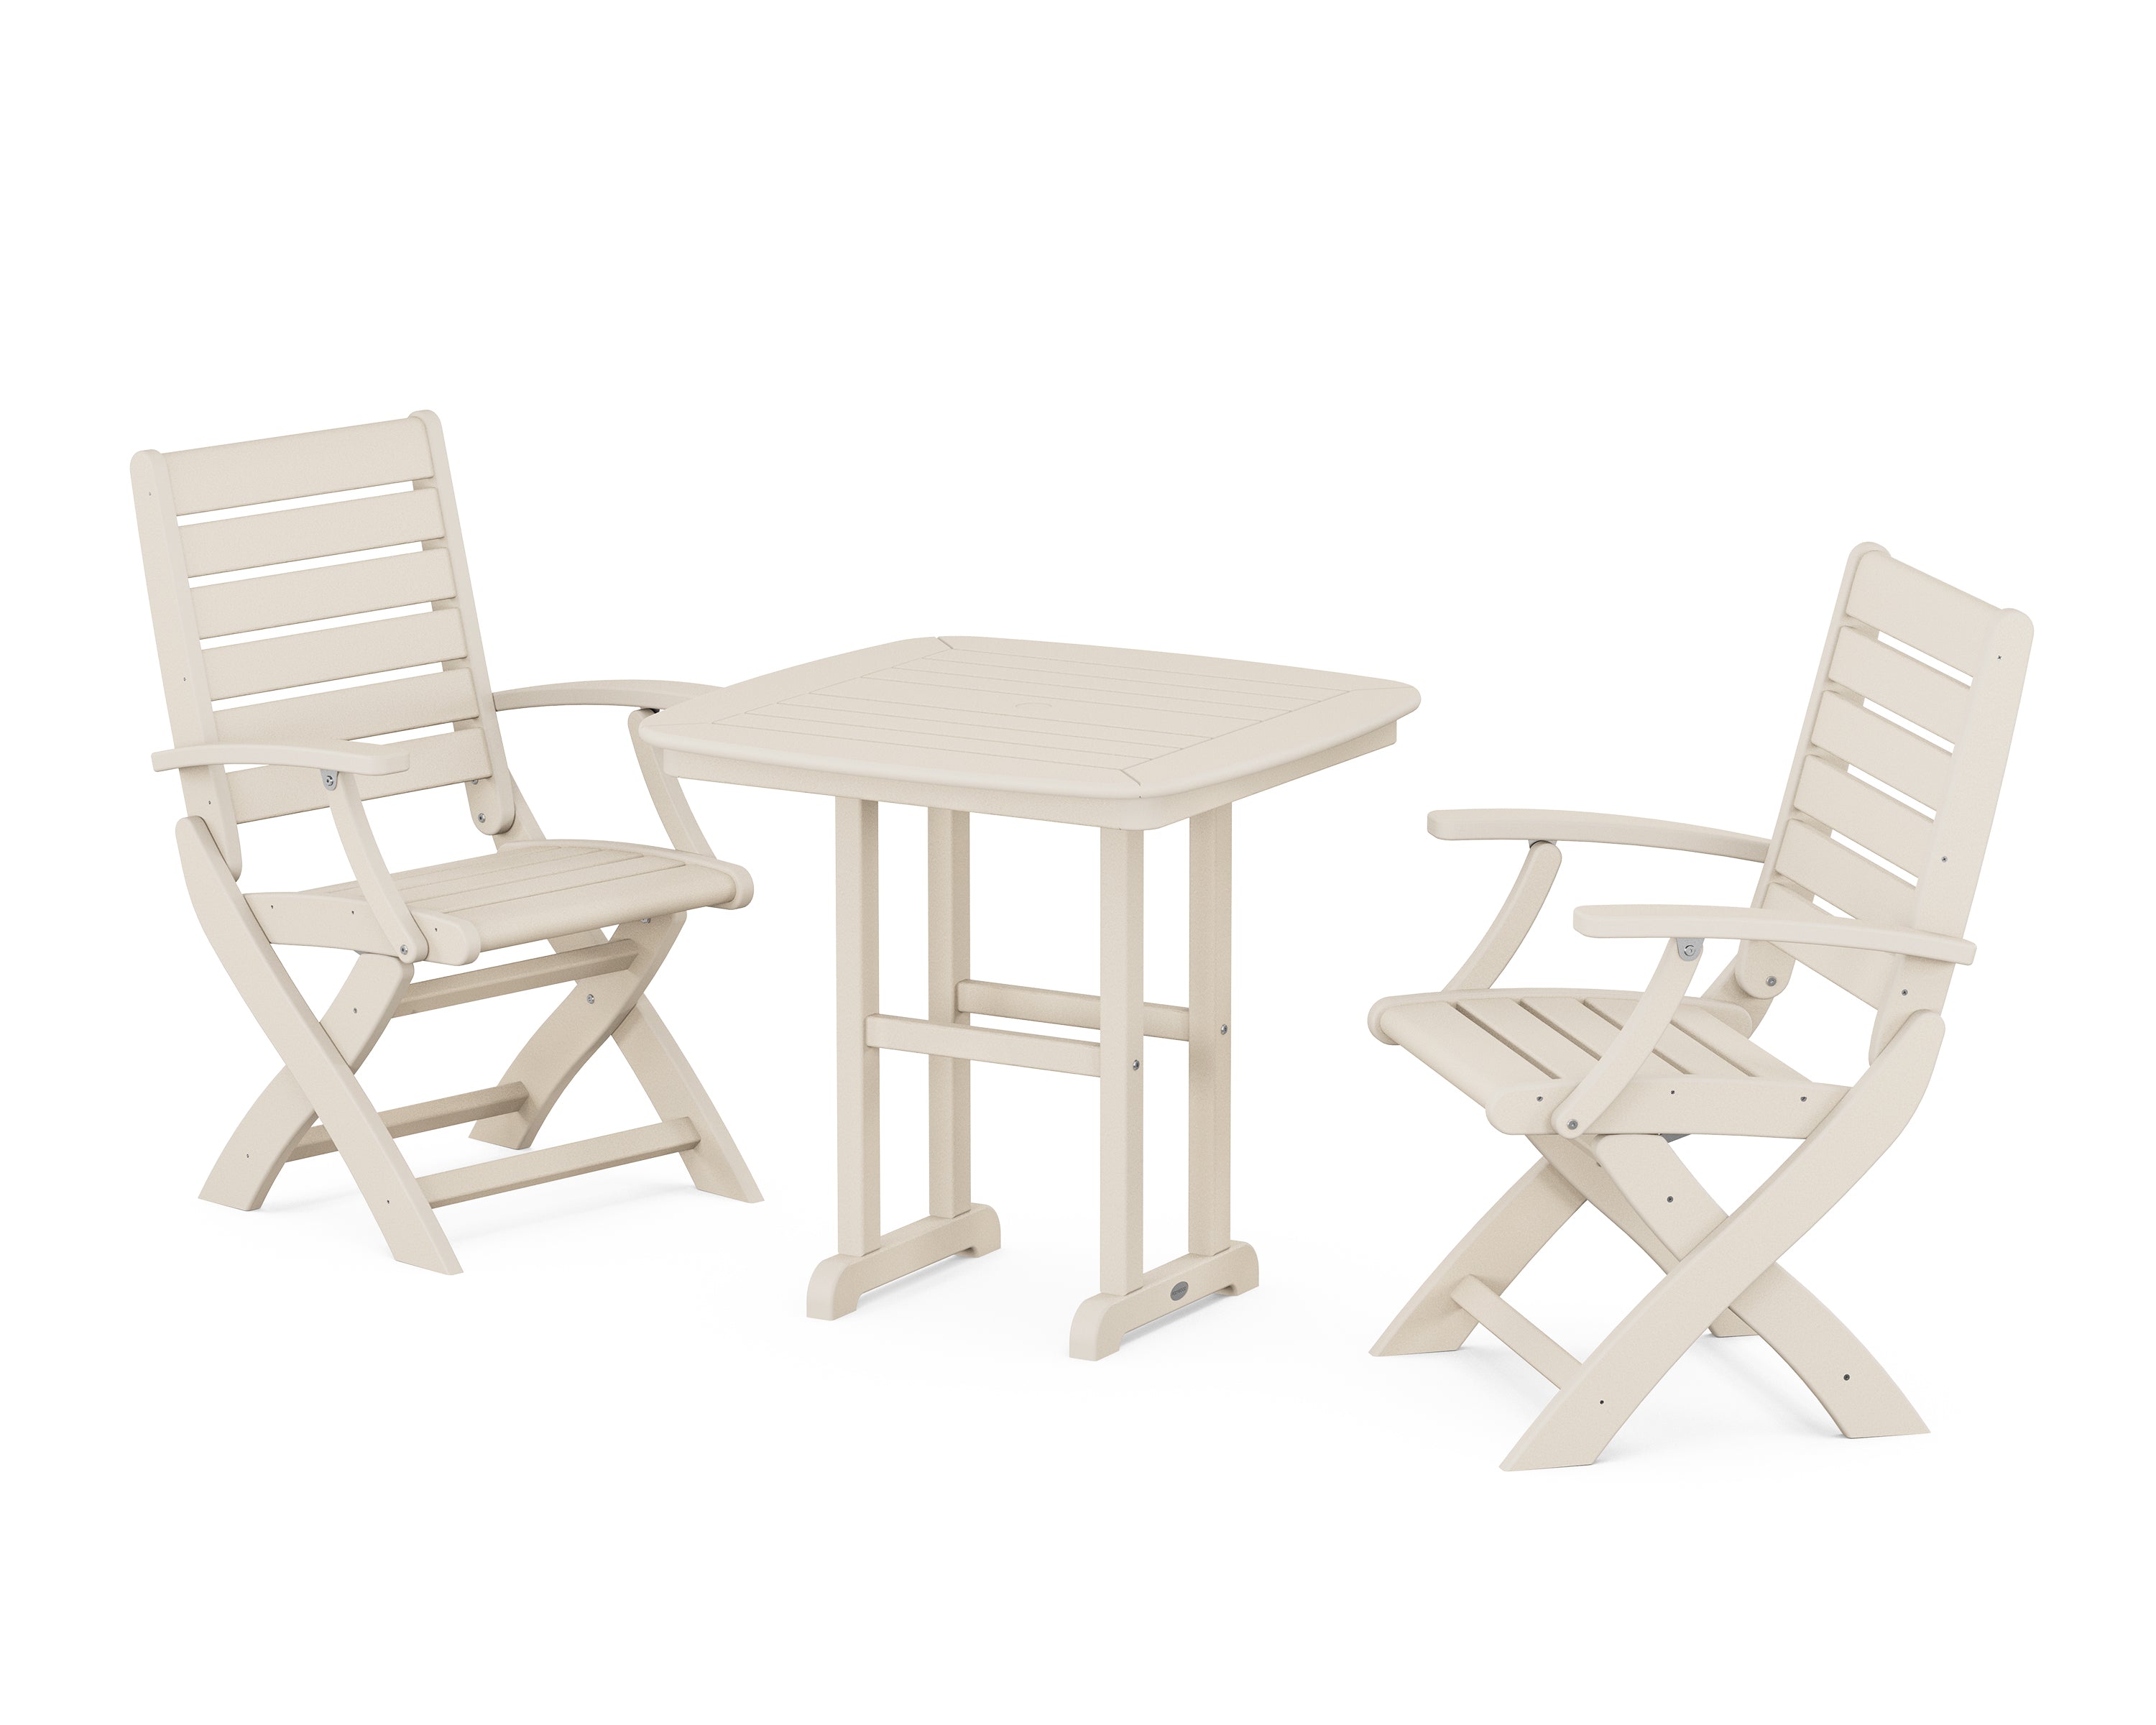 POLYWOOD® Signature Folding Chair 3-Piece Dining Set in Sand